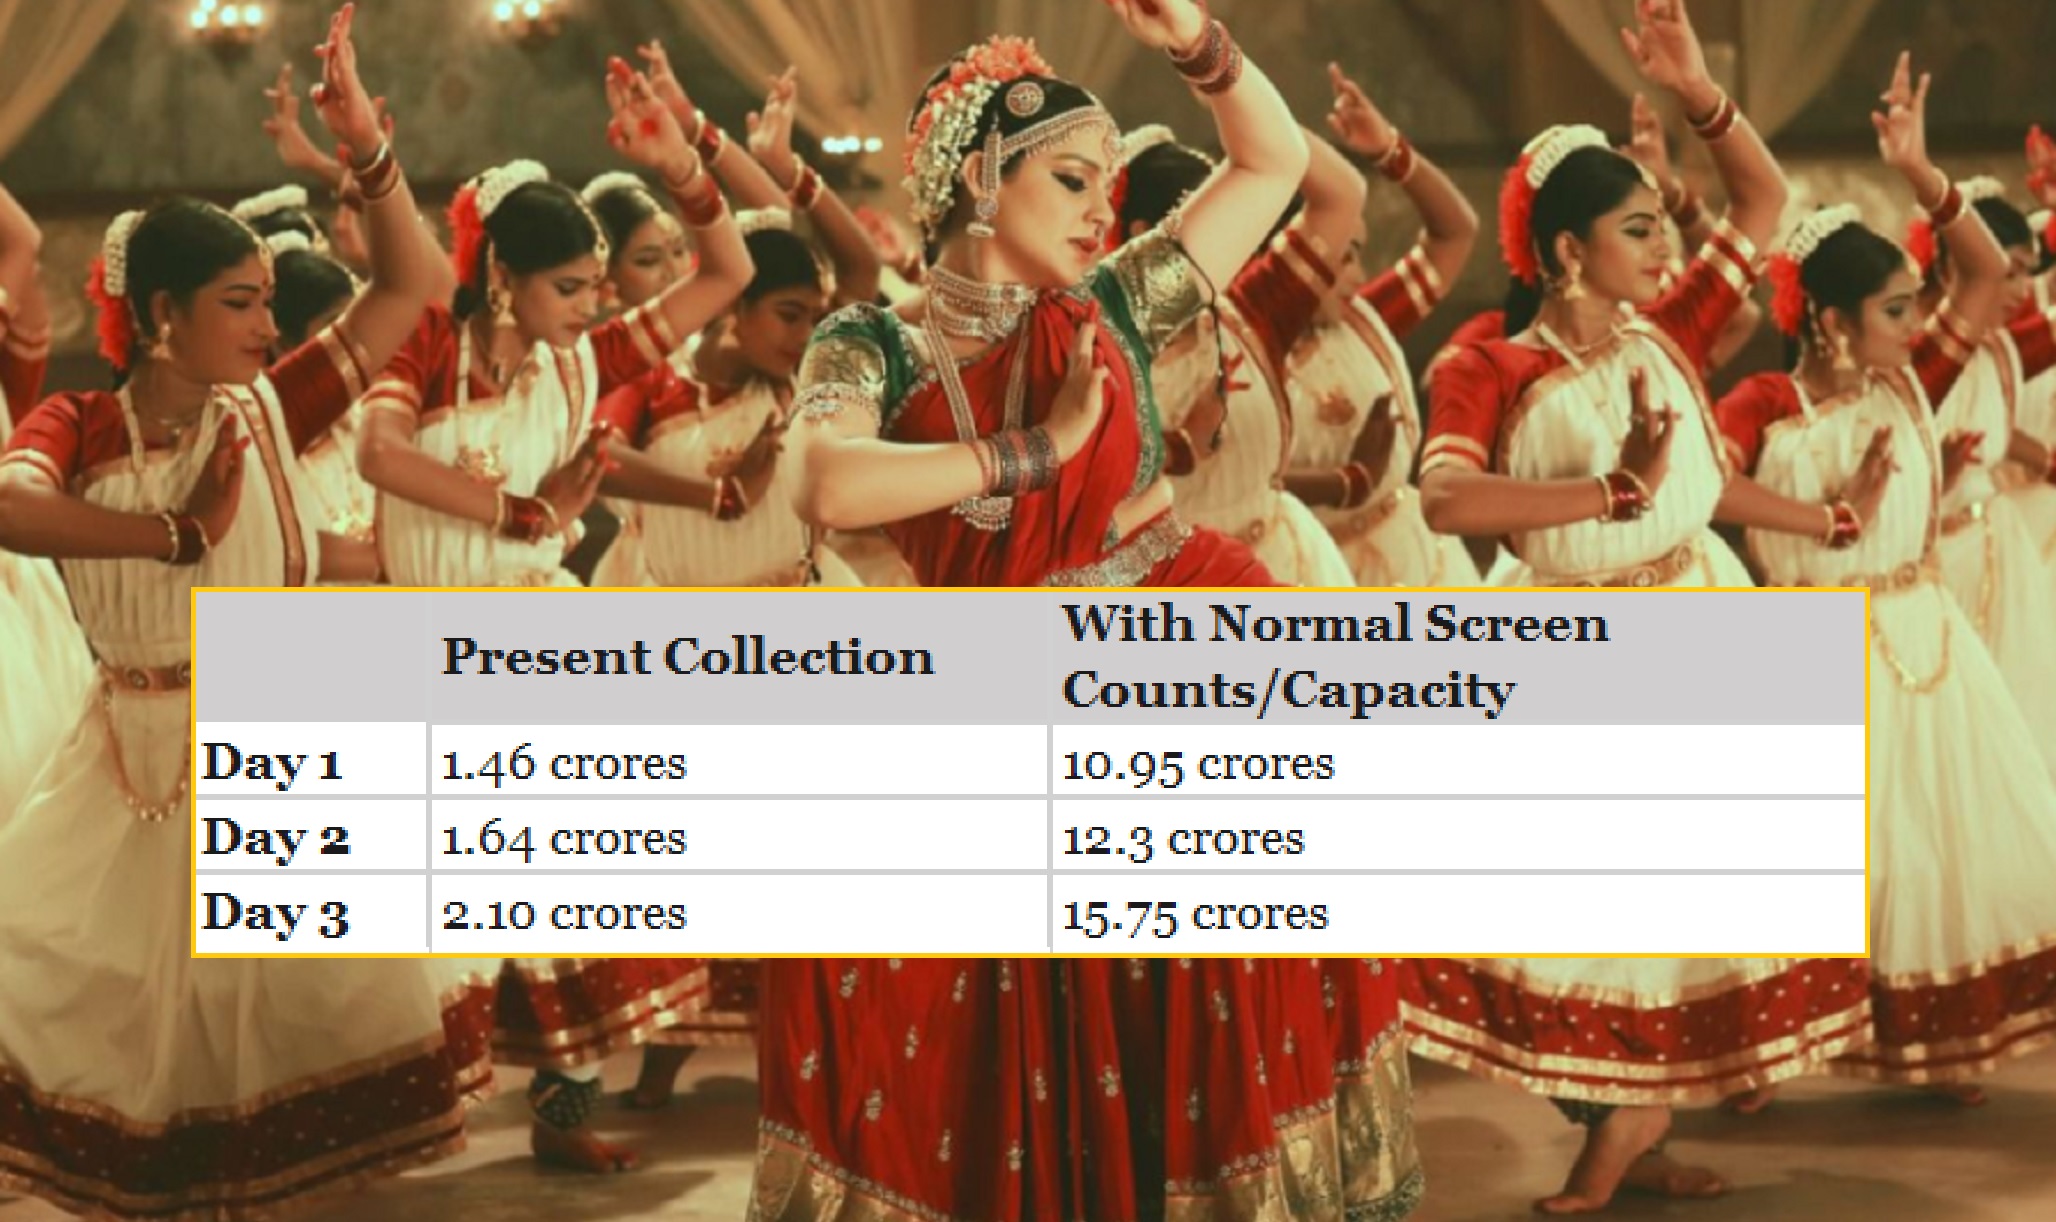 Weekend Box Office Breakdown Of Thalaivi: When Compared With Normal Screen Counts & Full Occupancy